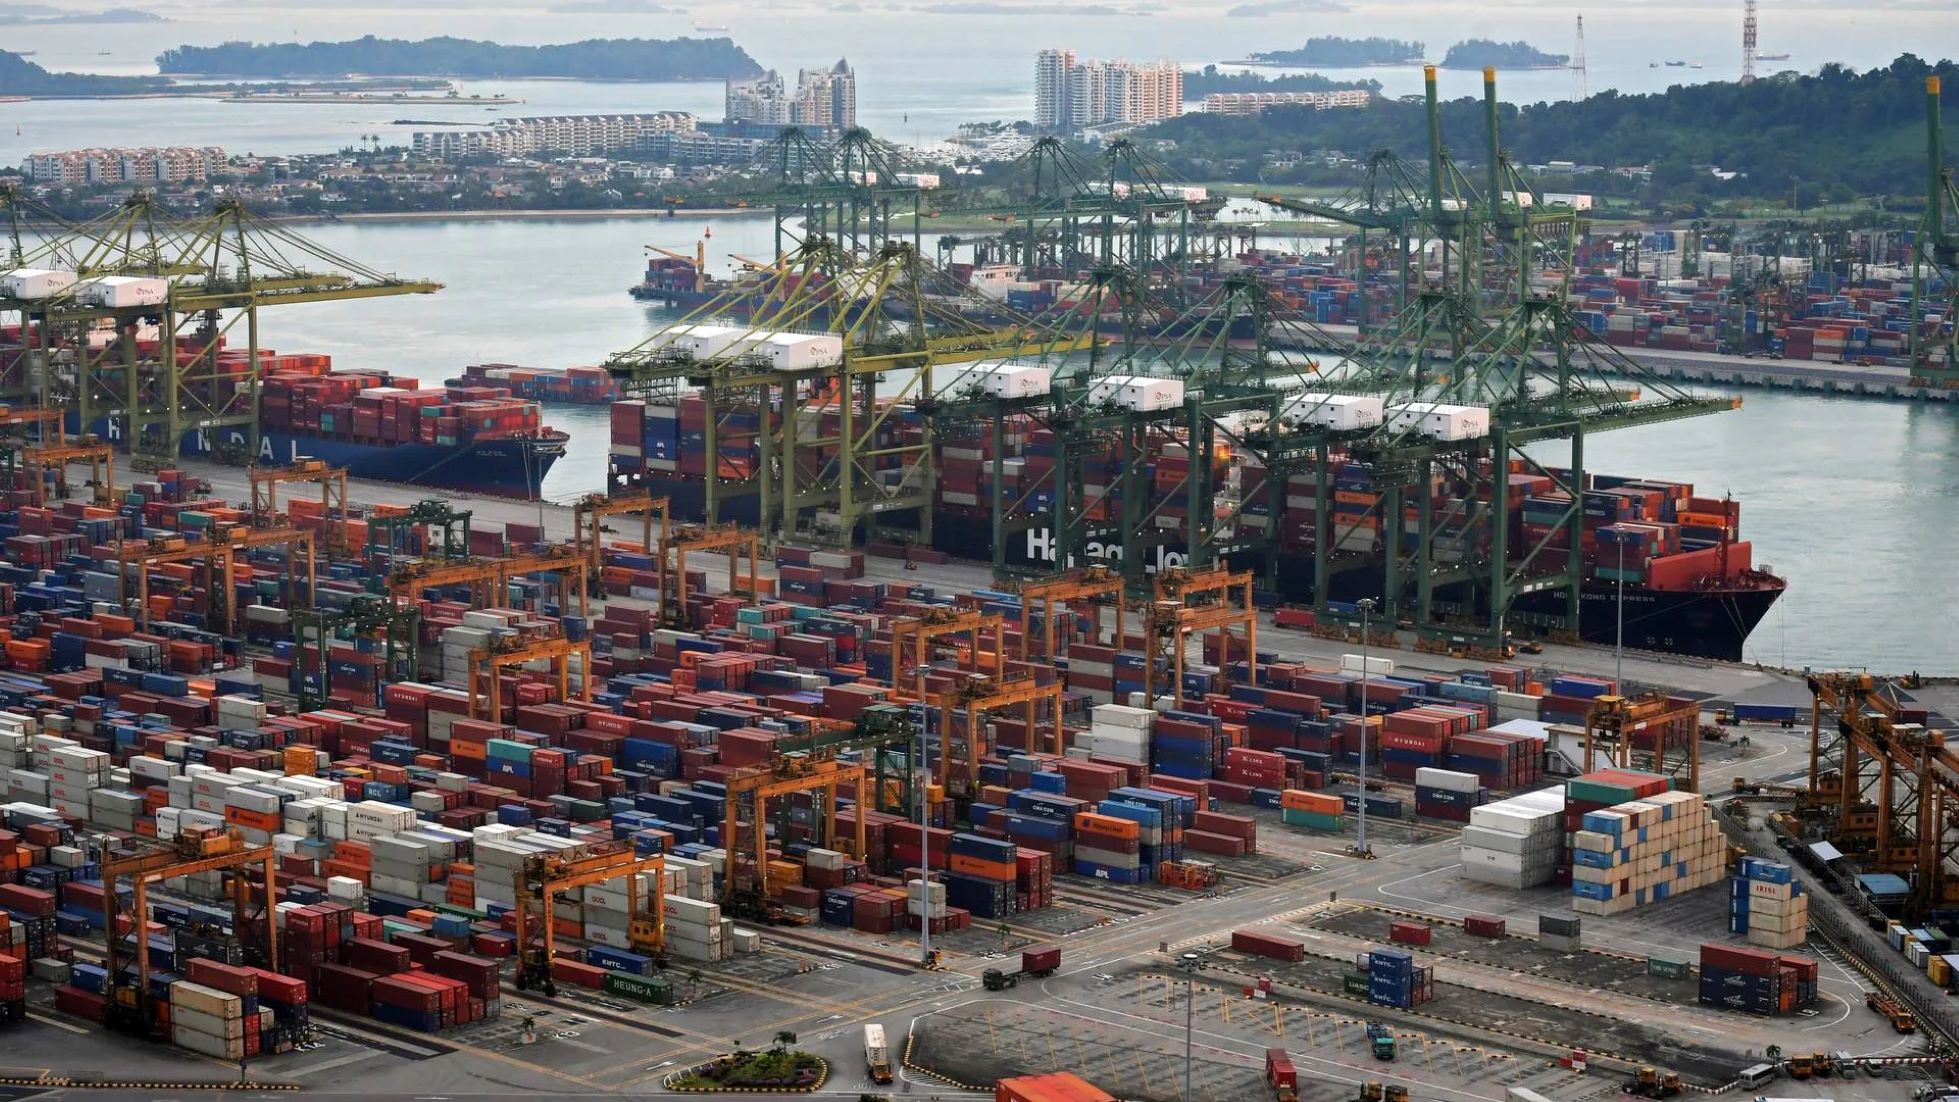 90 Percent Of Container Vessels Delayed In Singapore: Official